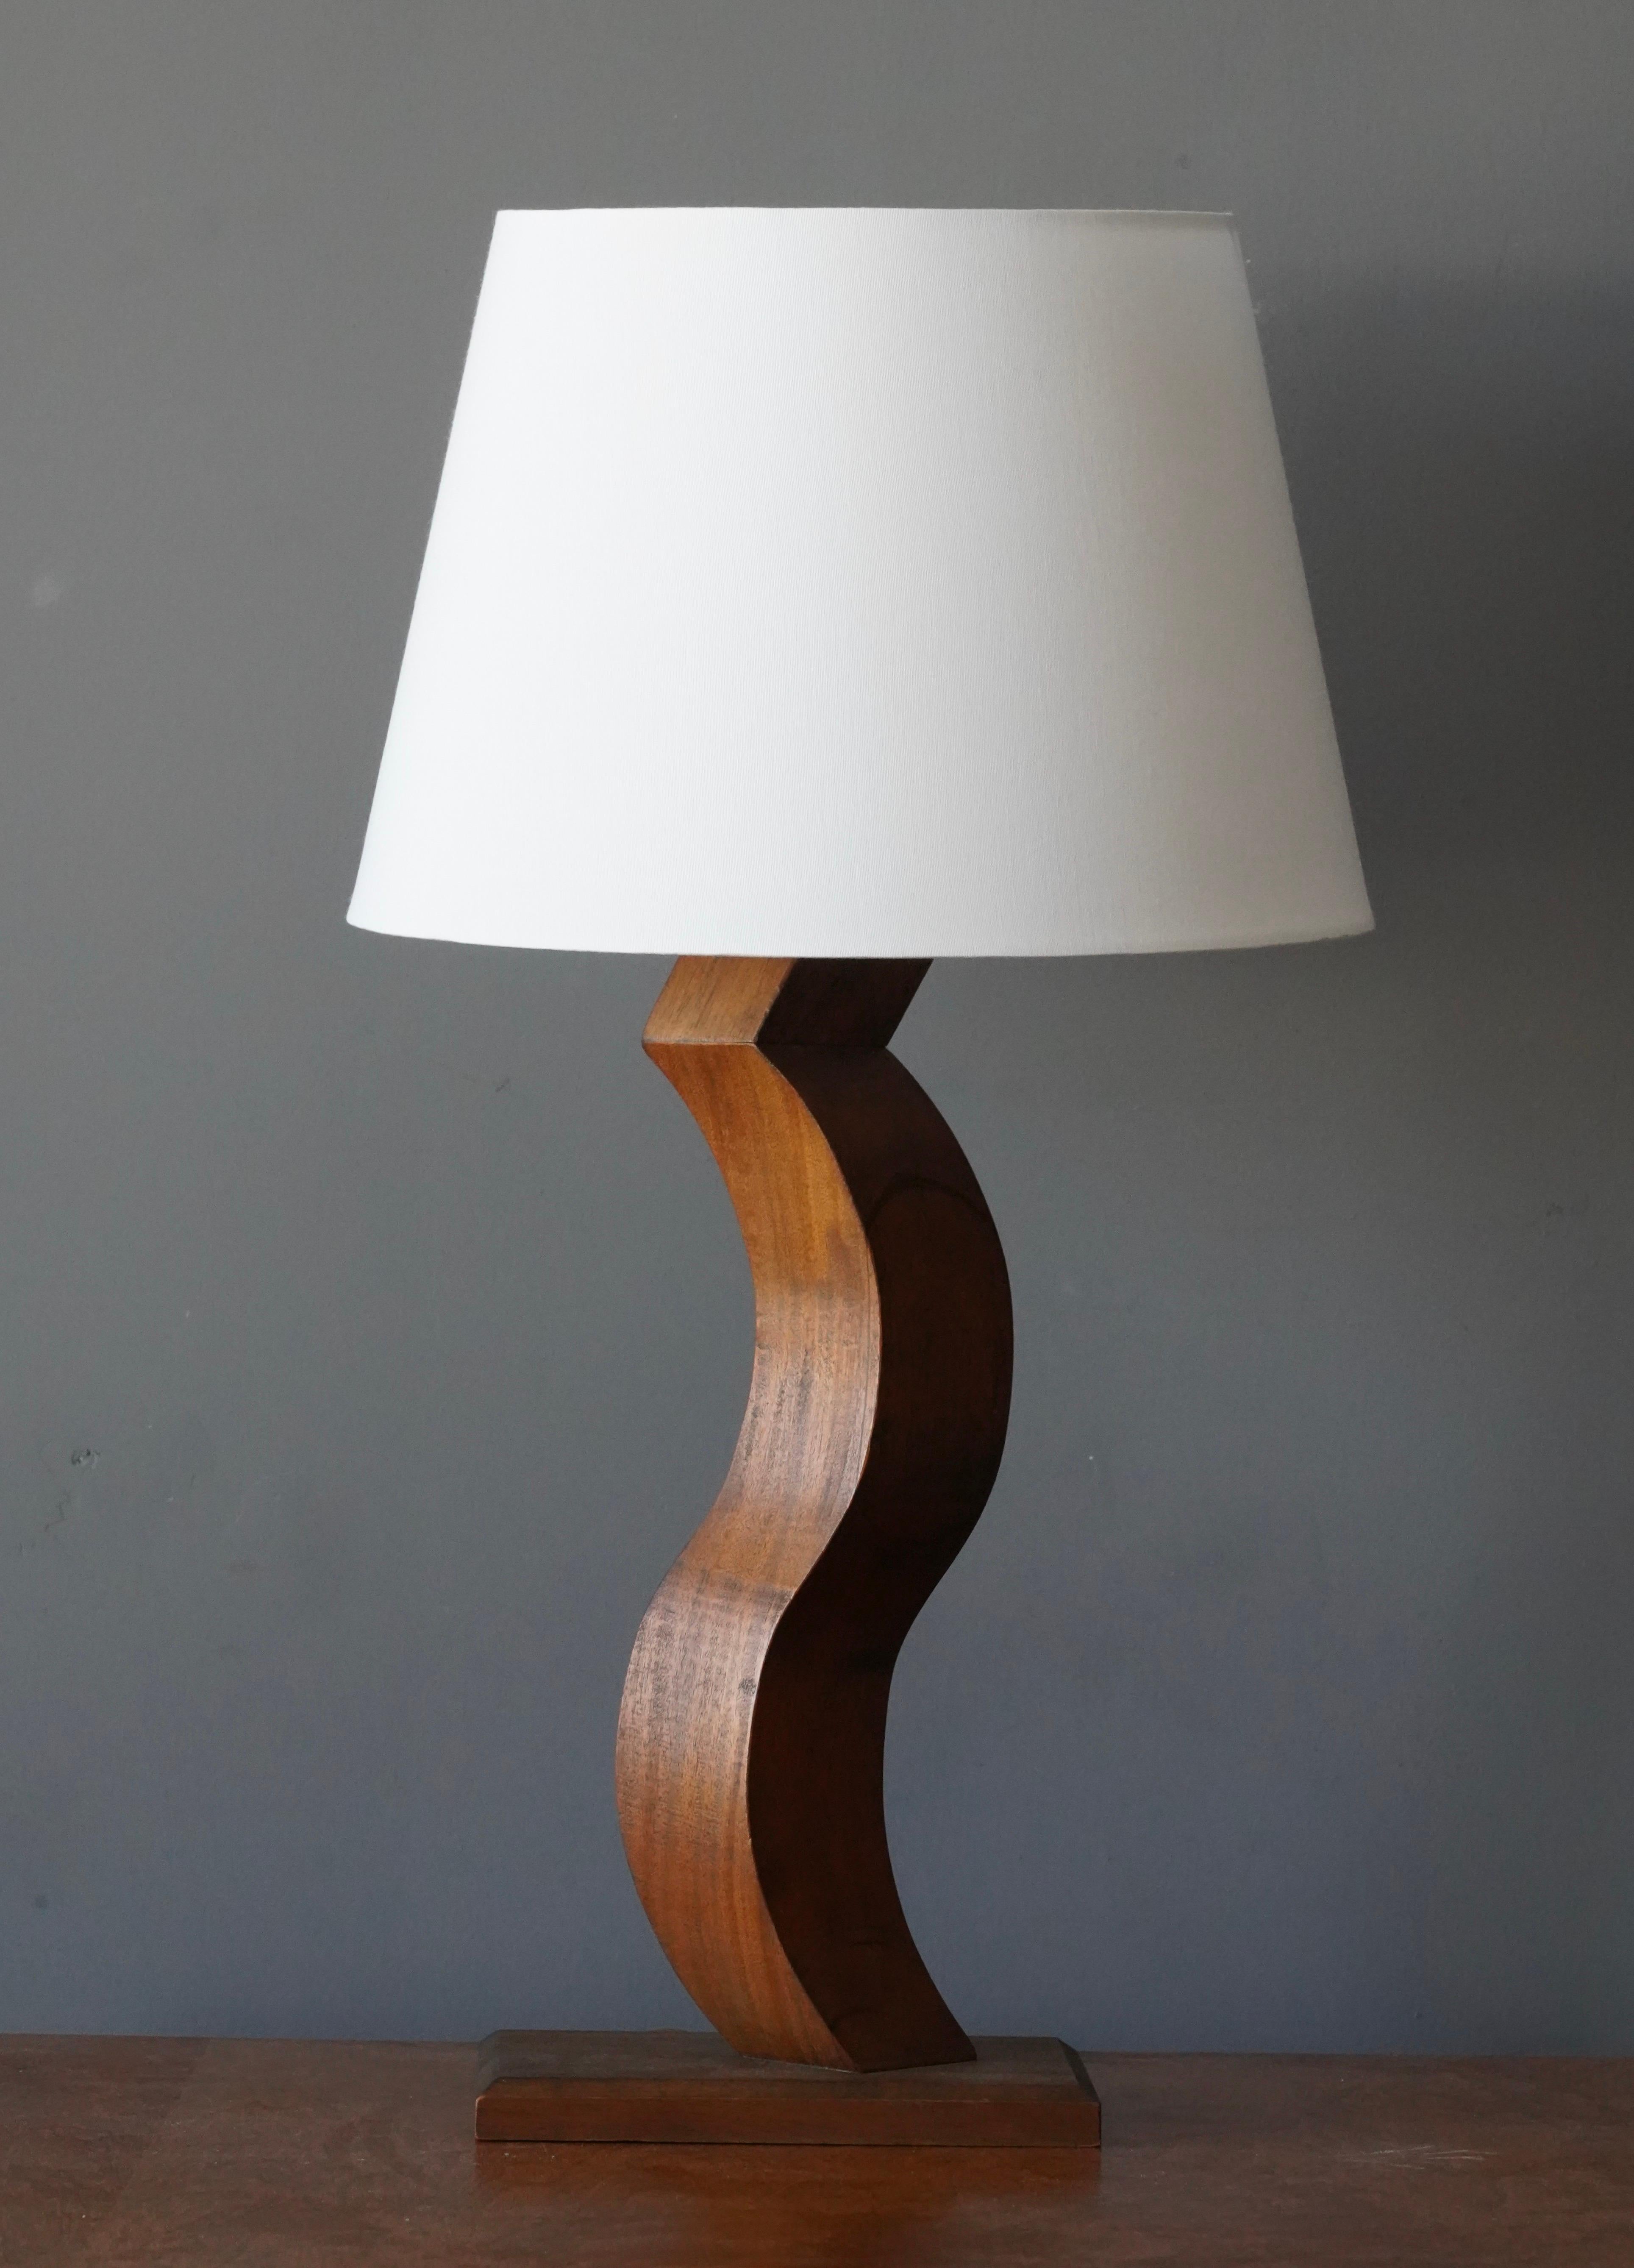 A table lamp. In finely carved and stained oak in abstract form. Designed and produced by unknown studio craftsman. Presents with beautiful original patina to wood and brass.

Sold without lampshade, stated dimensions excluding lampshade,

Takes